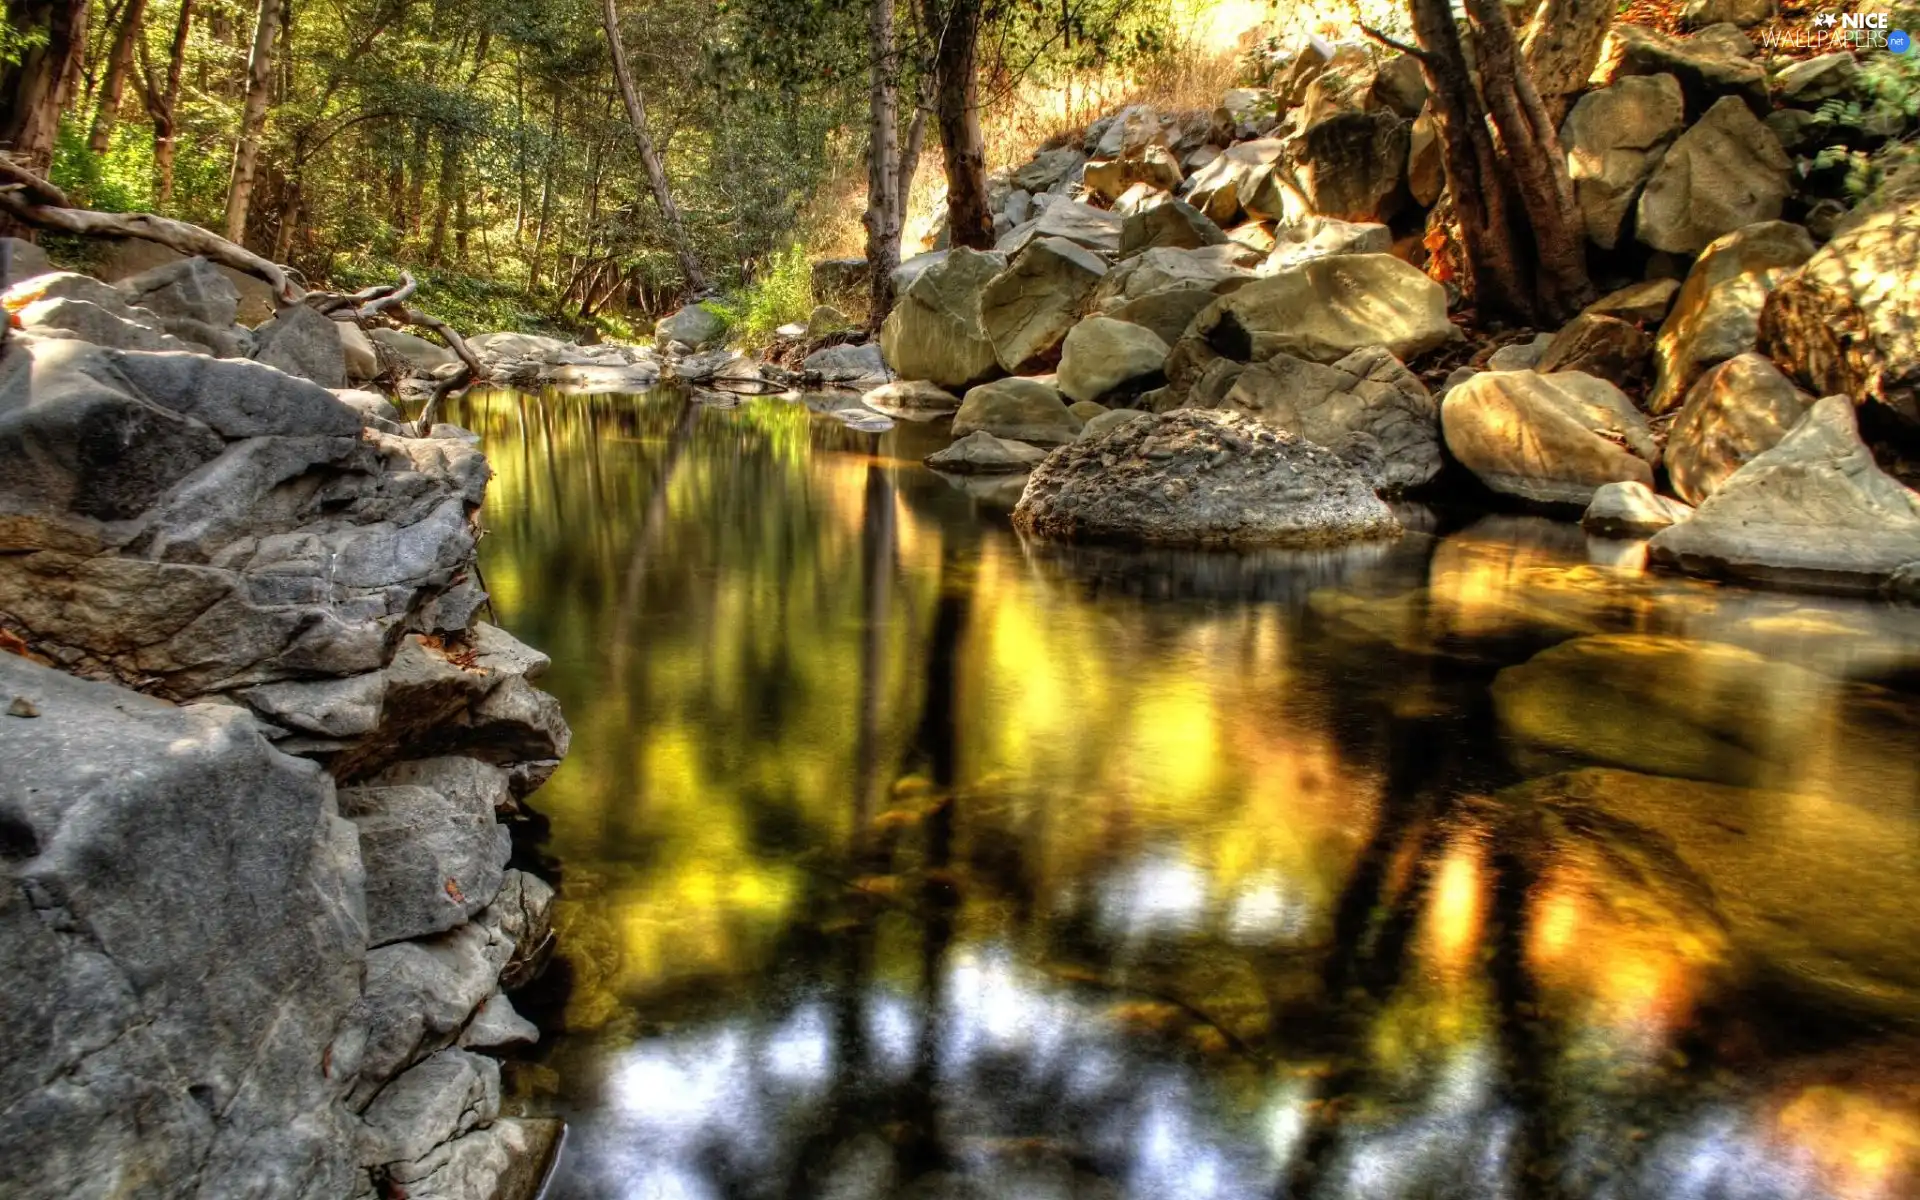 Mirror, reflection, Stones, forest, River